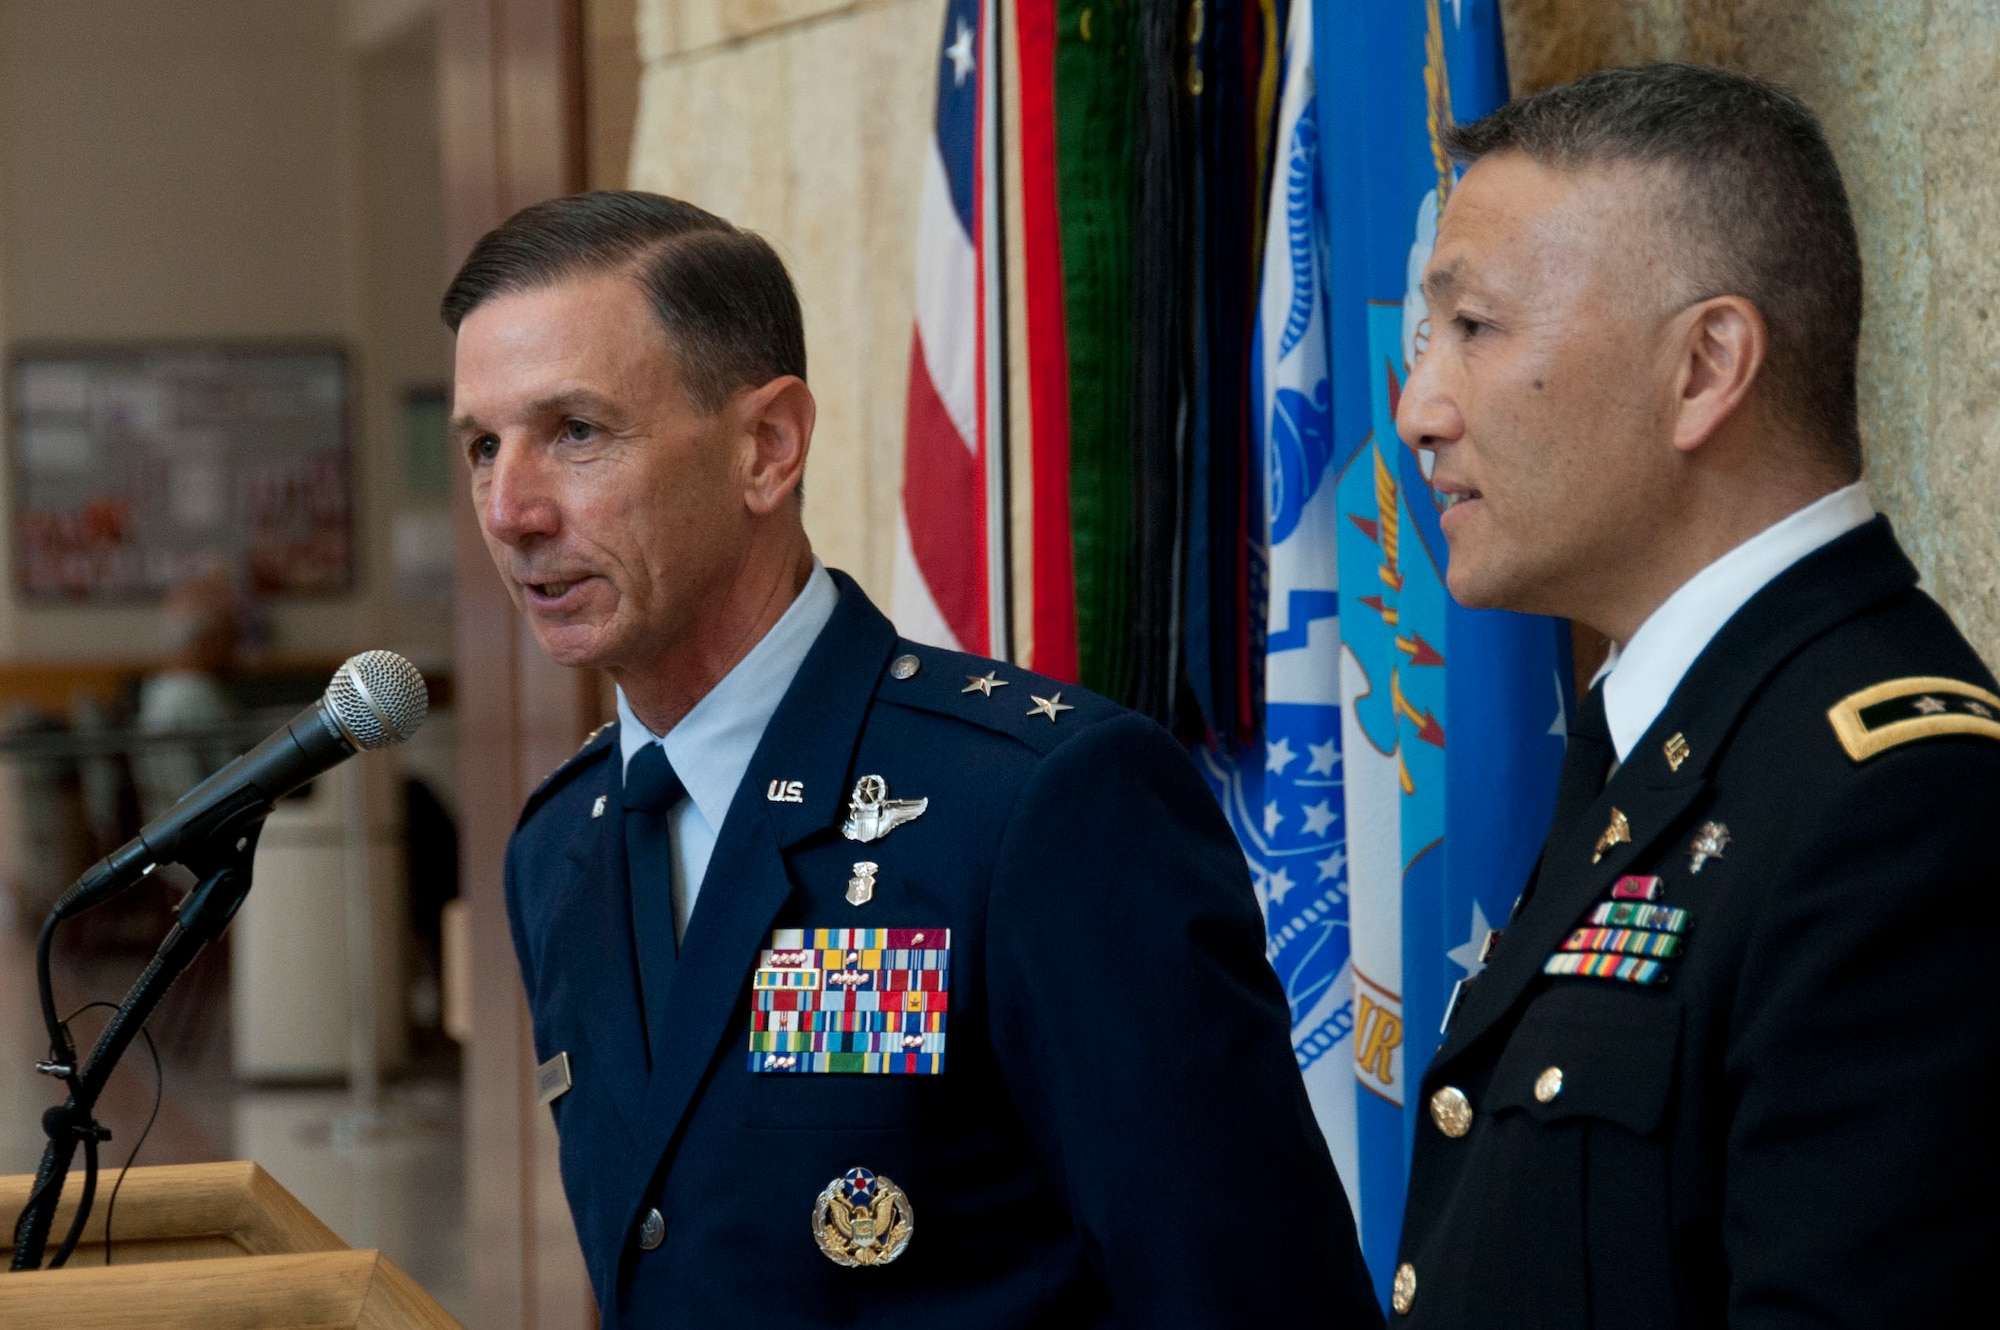 U.S. Air Force Maj. Gen. Byron Hepburn and Army Maj. Gen. Ted Wong speak during the San Antonio Military Health System one year anniversary celebration at the San Antonio Military Medical Center, Fort Sam Houston, Texas, Sept. 14.  Hepburn is the SAMHS director and the 59th Medical Wing commander. Wong is the deputy director and the Brooke Army Medical Center commander. (U.S. Air Force photo/SSgt. Corey Hook)
